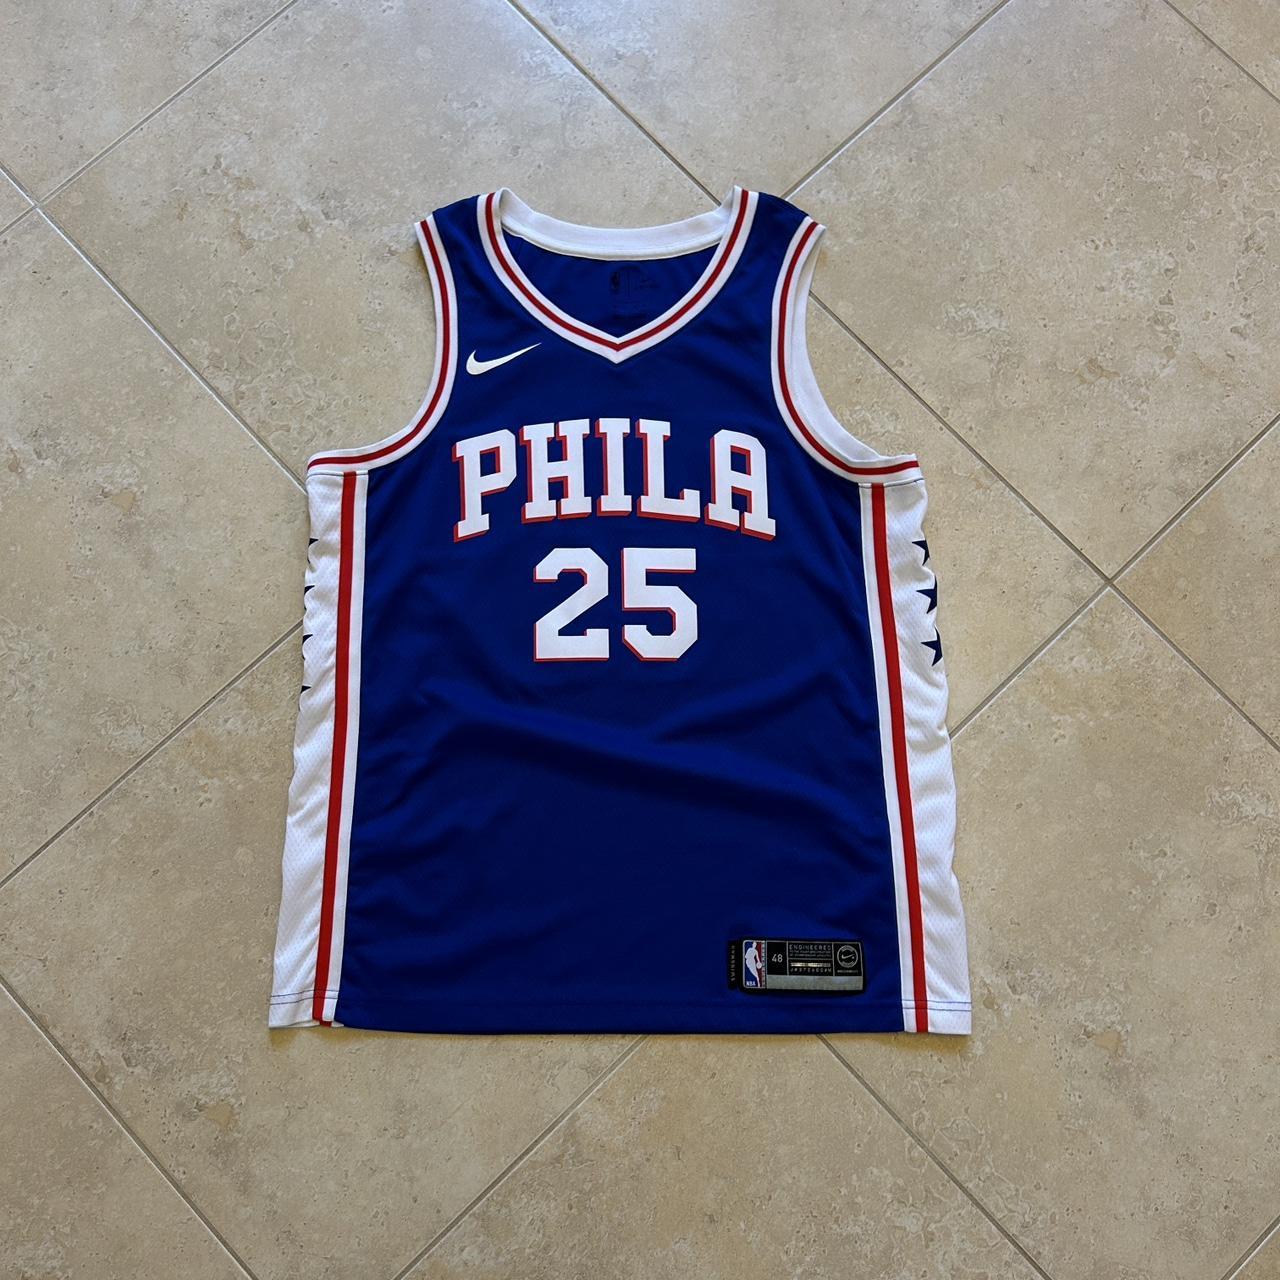 Ben Simmons 76ers Jersey Size L Excellent Used... - Depop